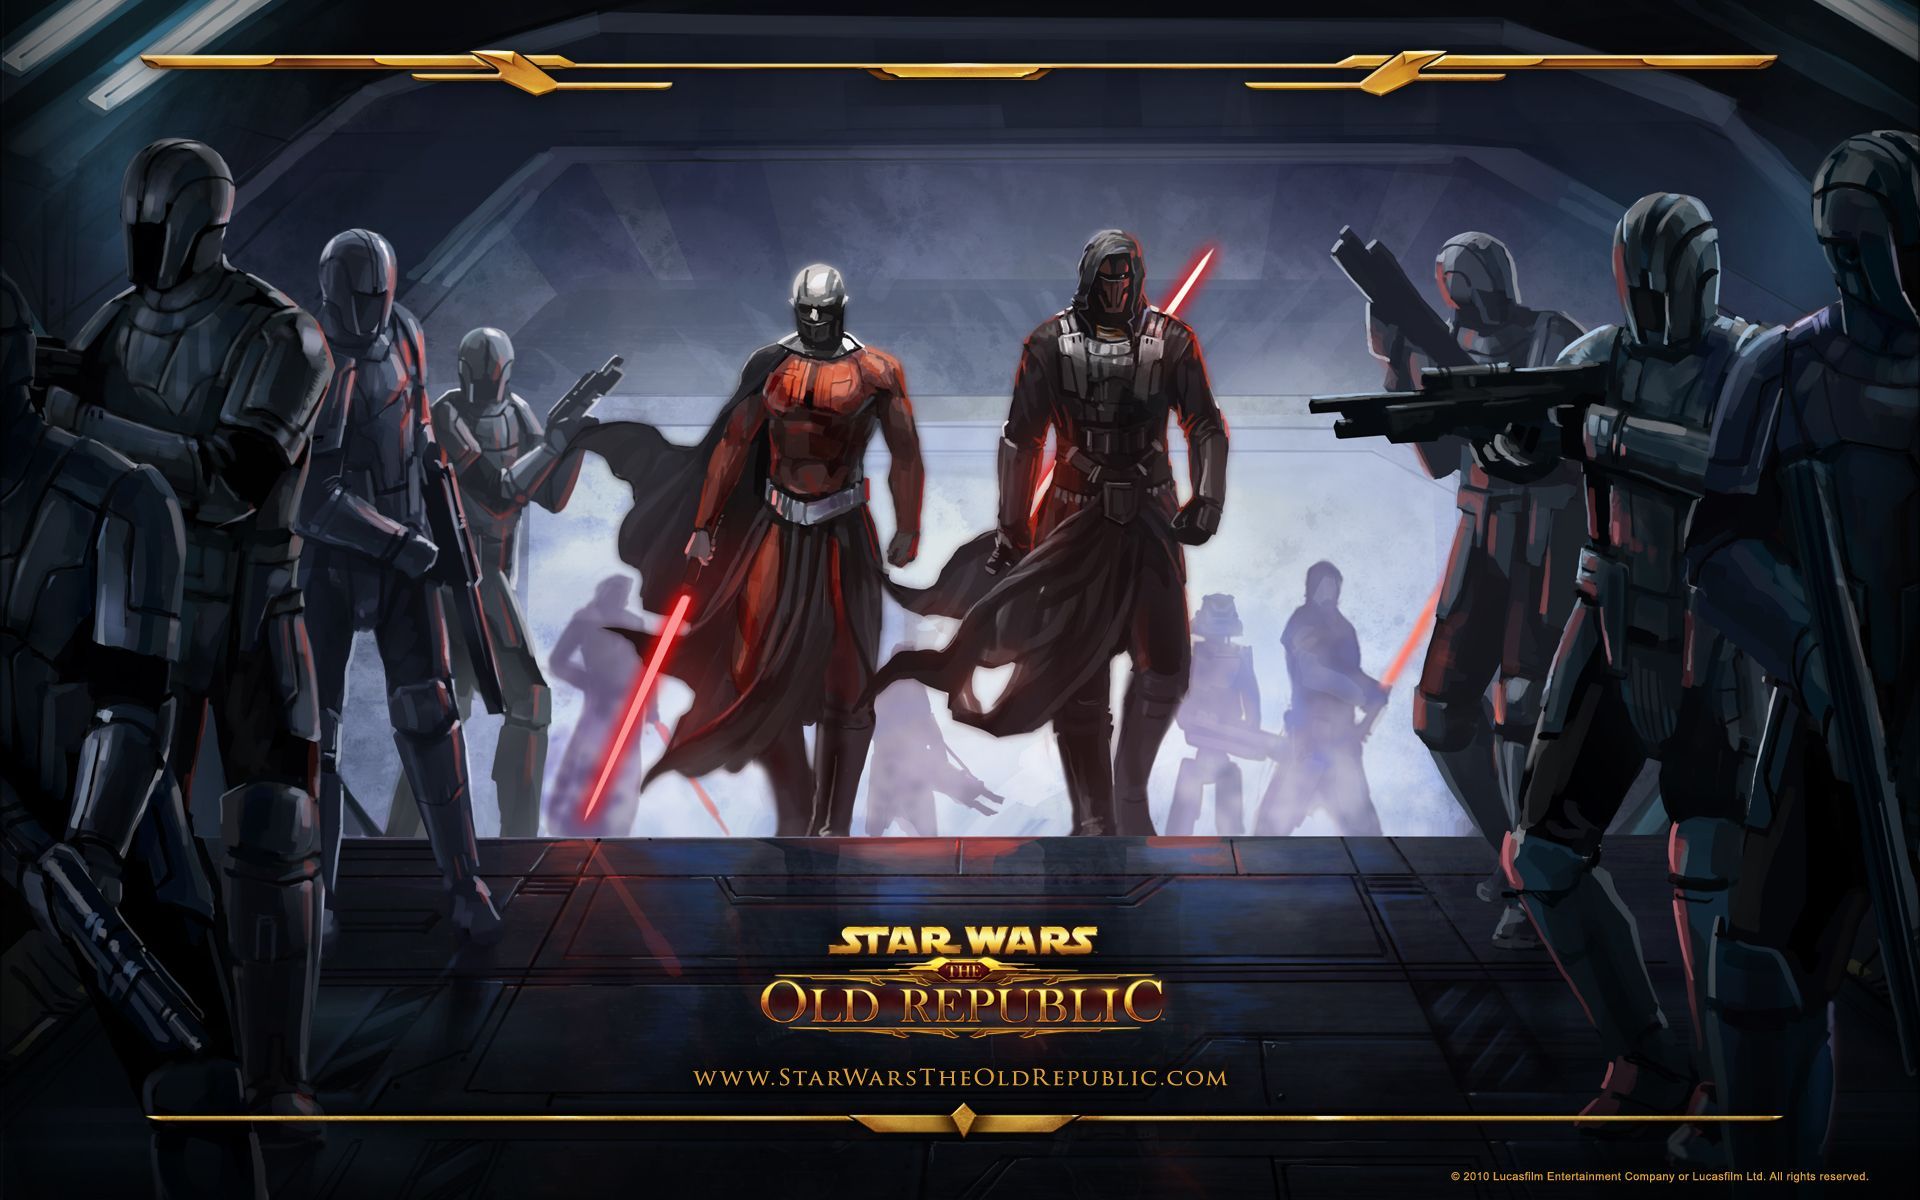 Star Wars the Old Republic HD wallpapers - Abbreviated as TOR or SWTOR